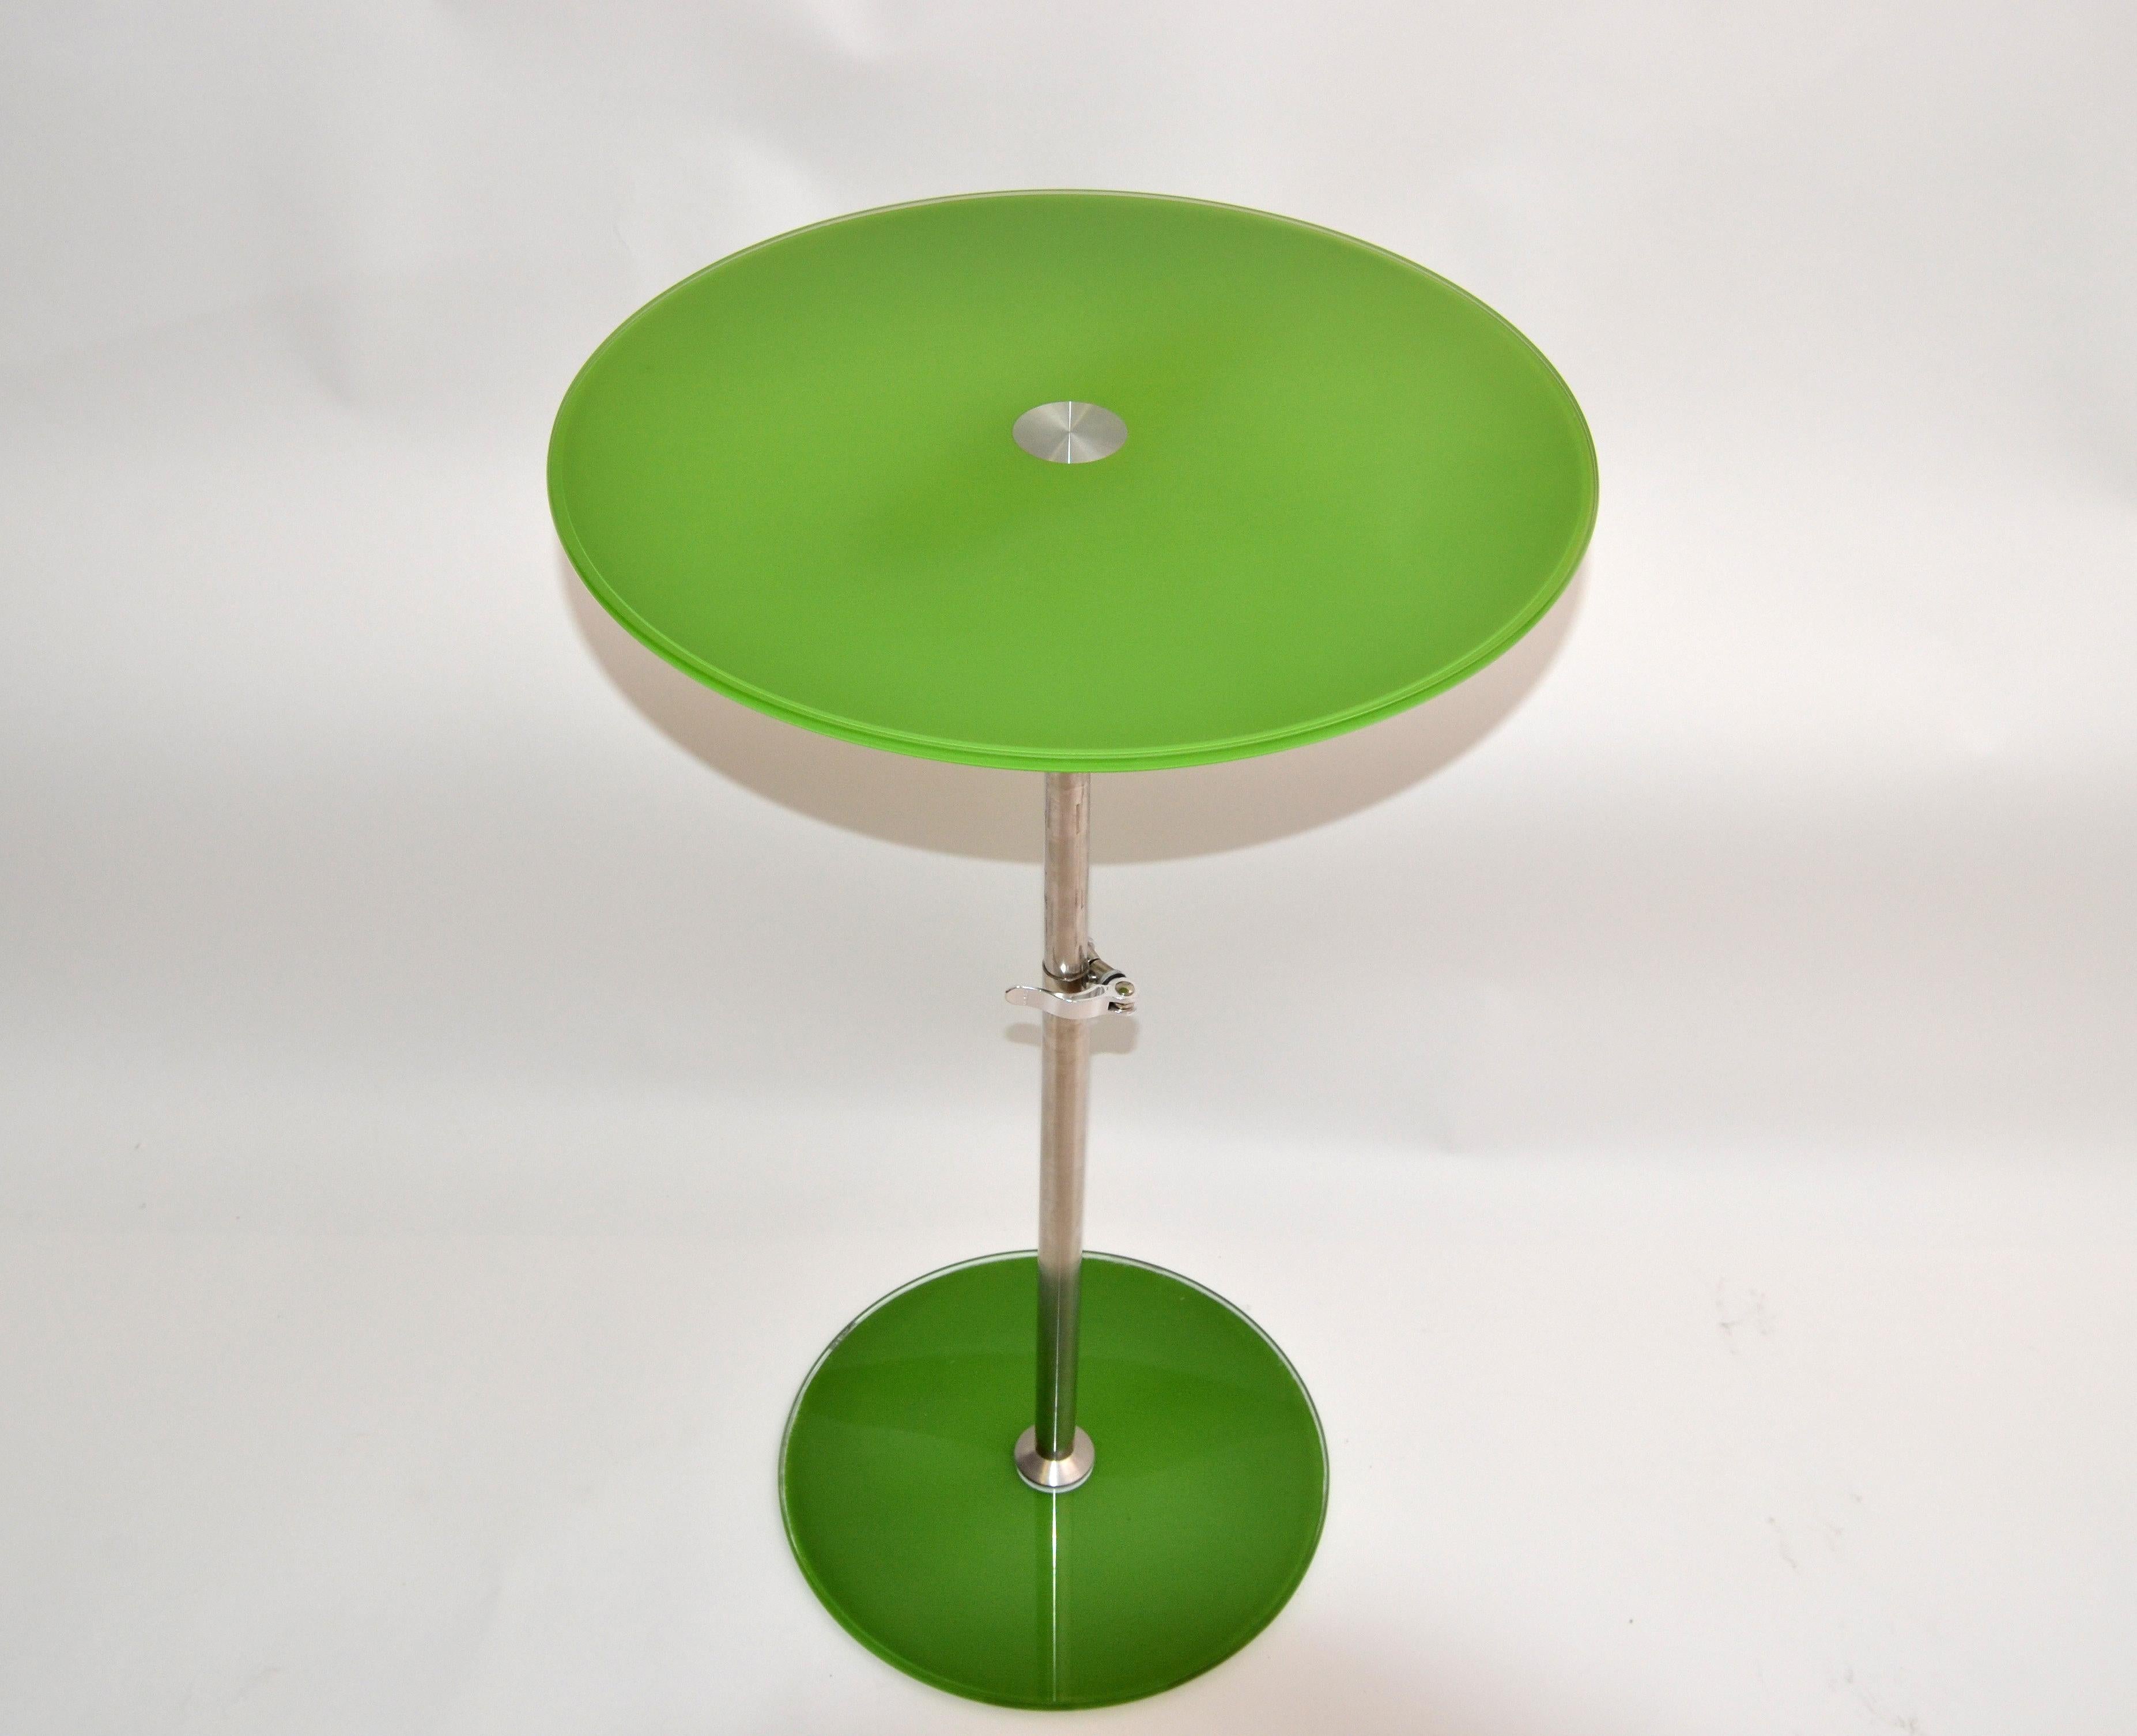 American Modern Adjustable Green Tempered Glass & Brushed Steel Side Table, Bistro Table